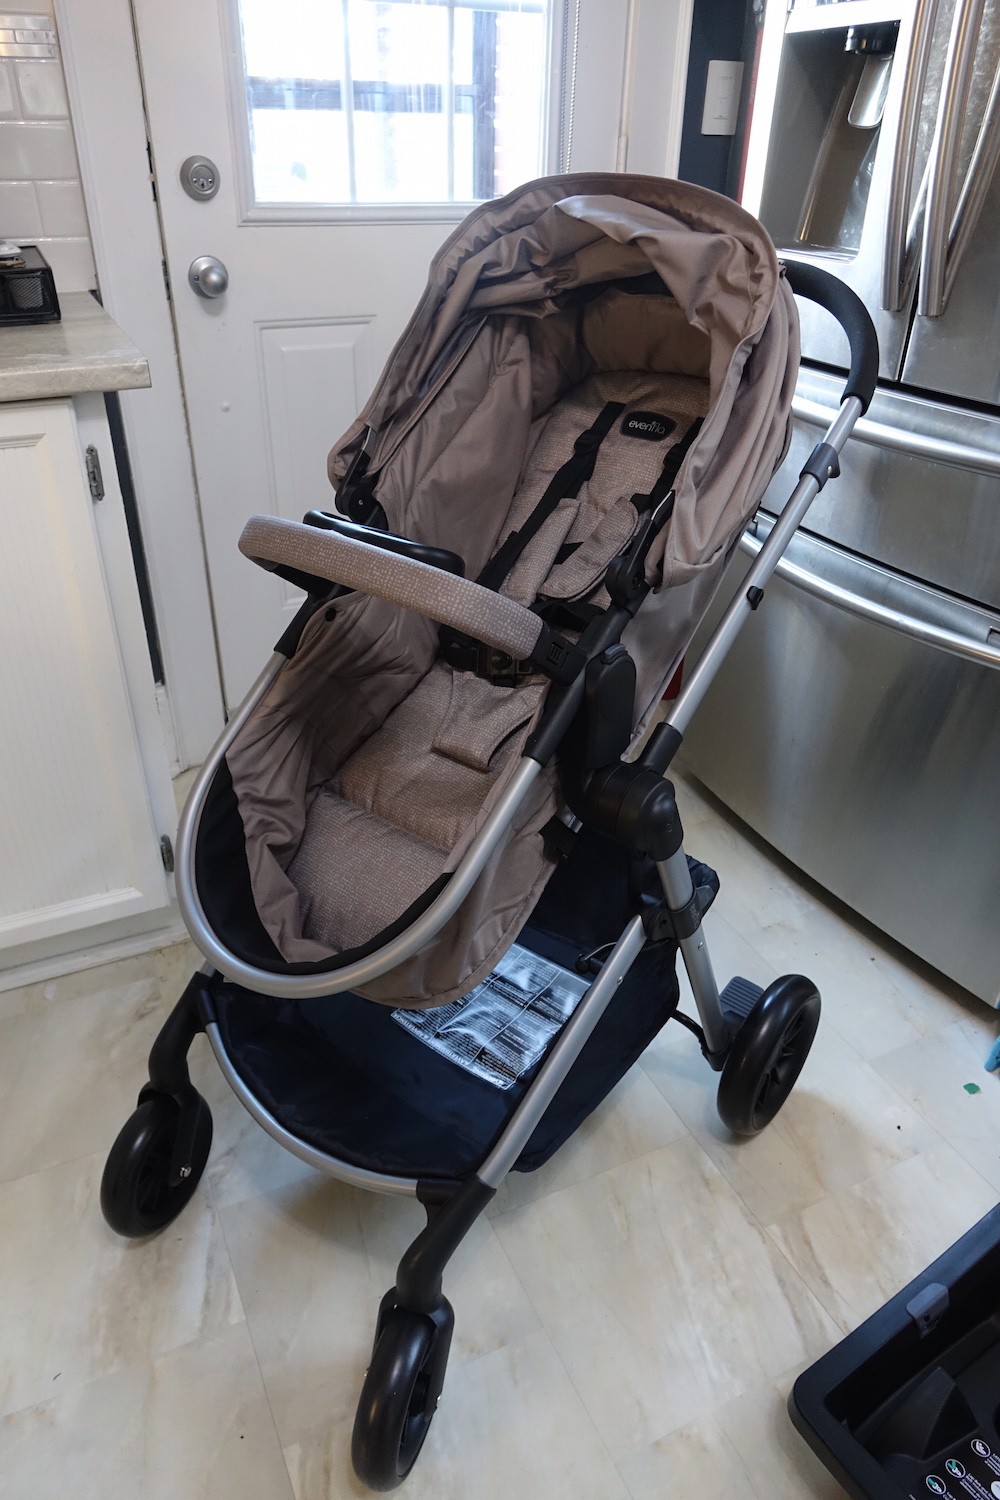 evenflo travel system weight limit